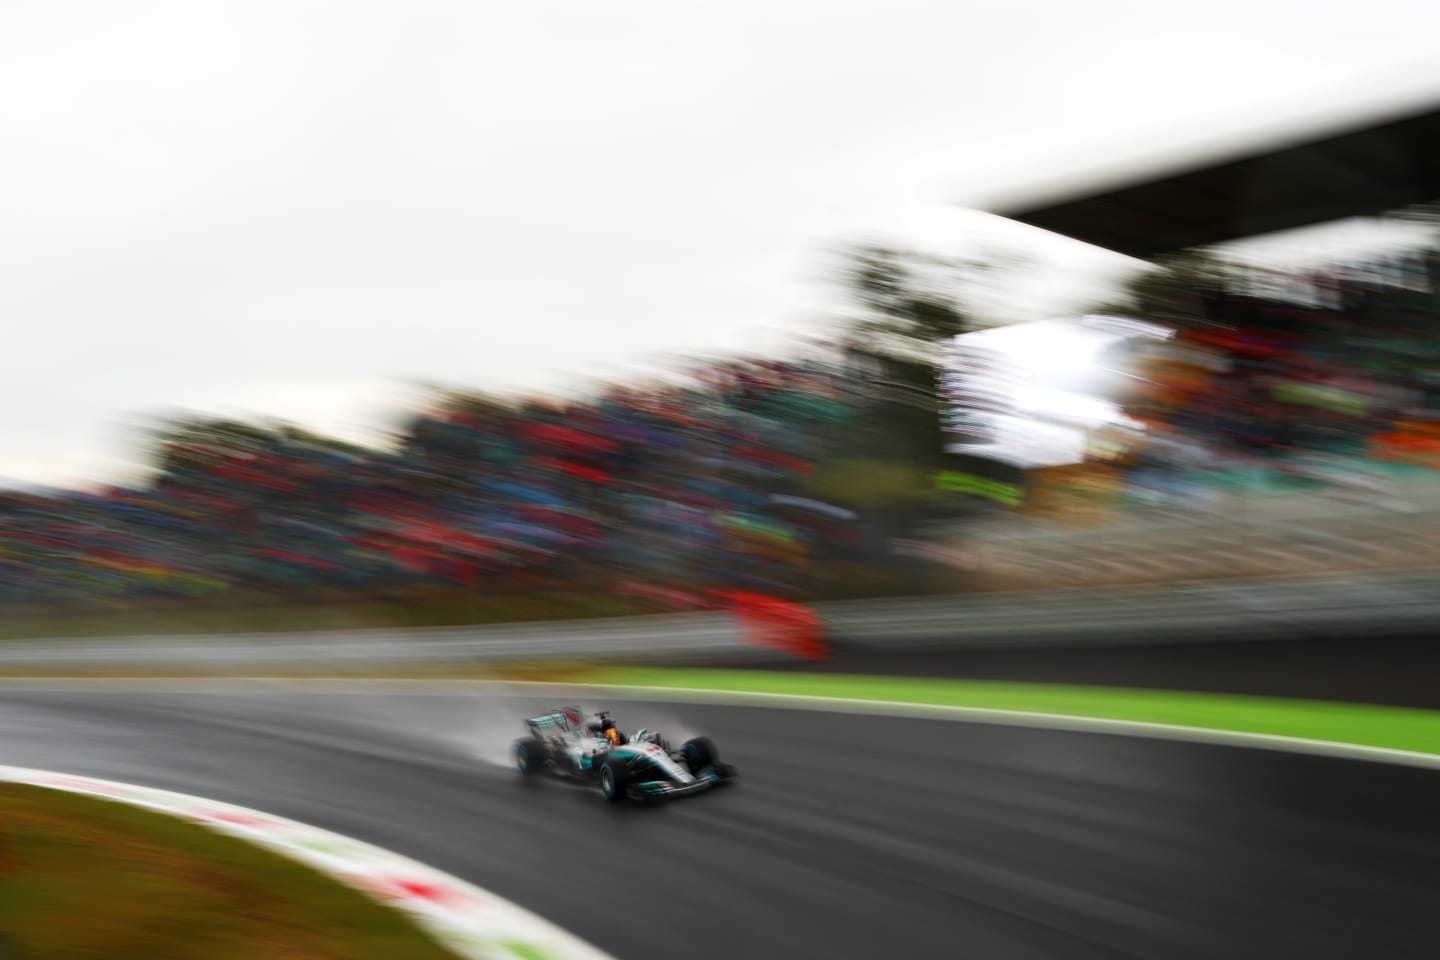 MONZA, ITALY - SEPTEMBER 02: Lewis Hamilton of Great Britain driving the (44) Mercedes AMG Petronas